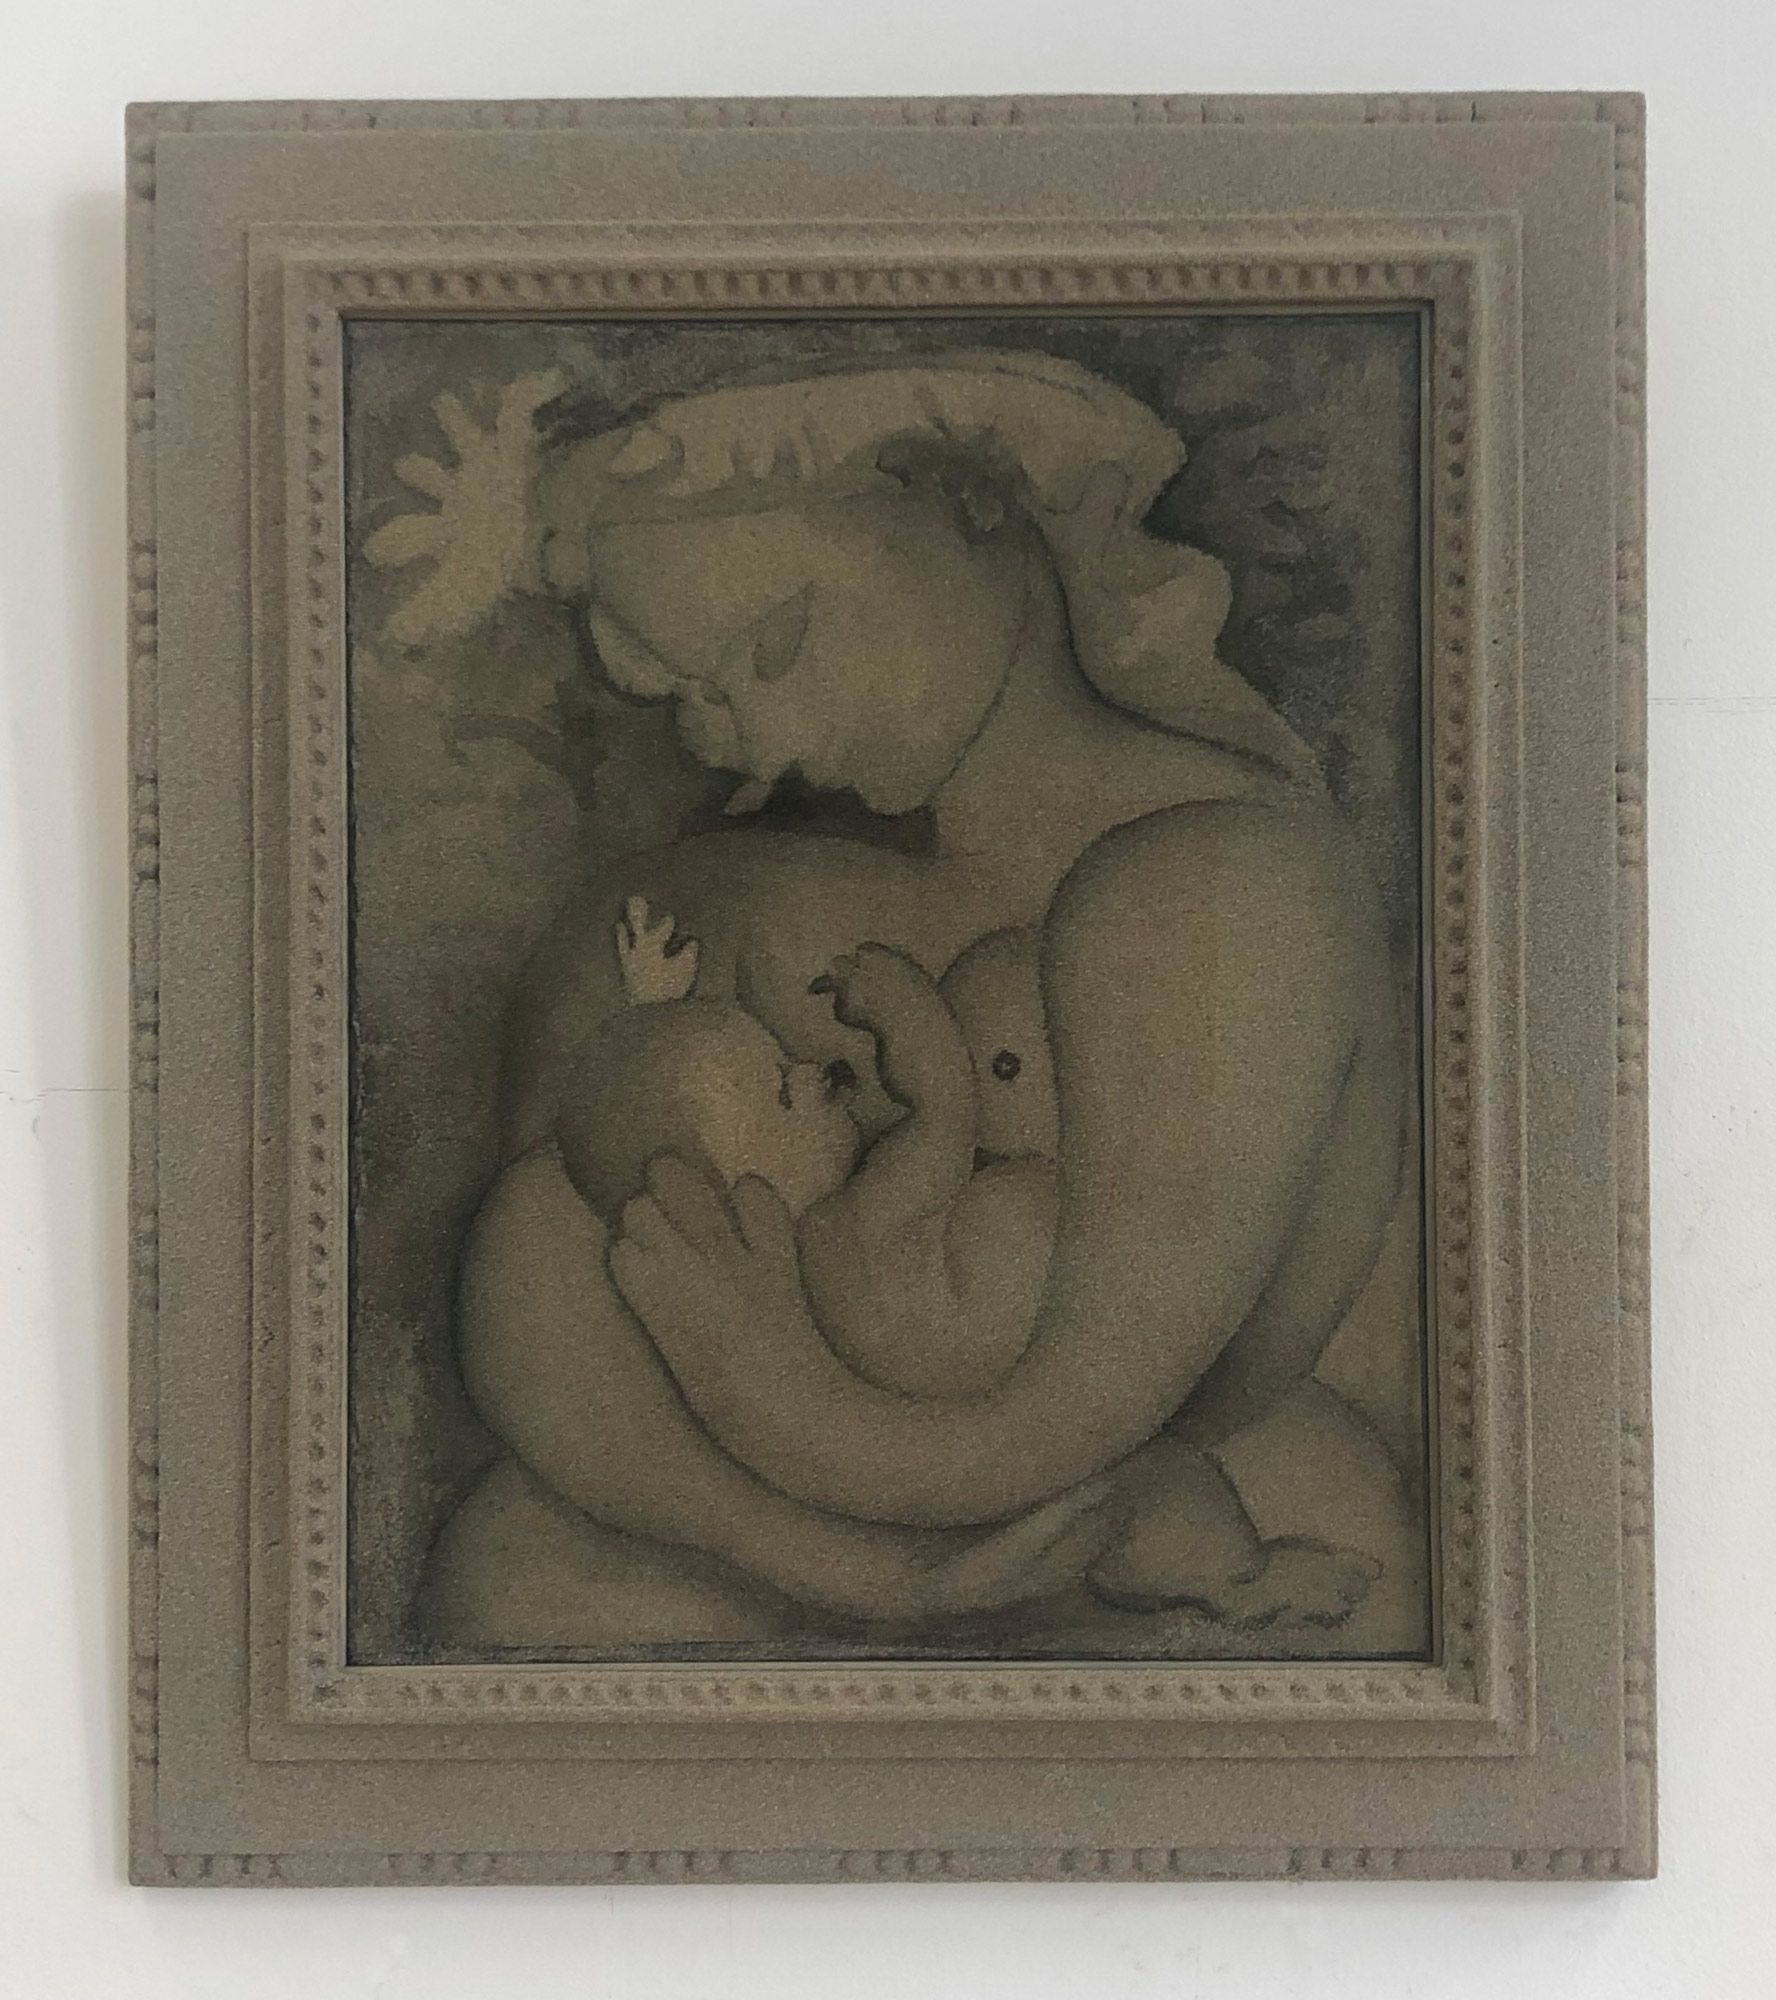 Quartz sand artwork with varying shades forming a frame; depicts a mother and child, inspired by a Pablo Picasso drawing.